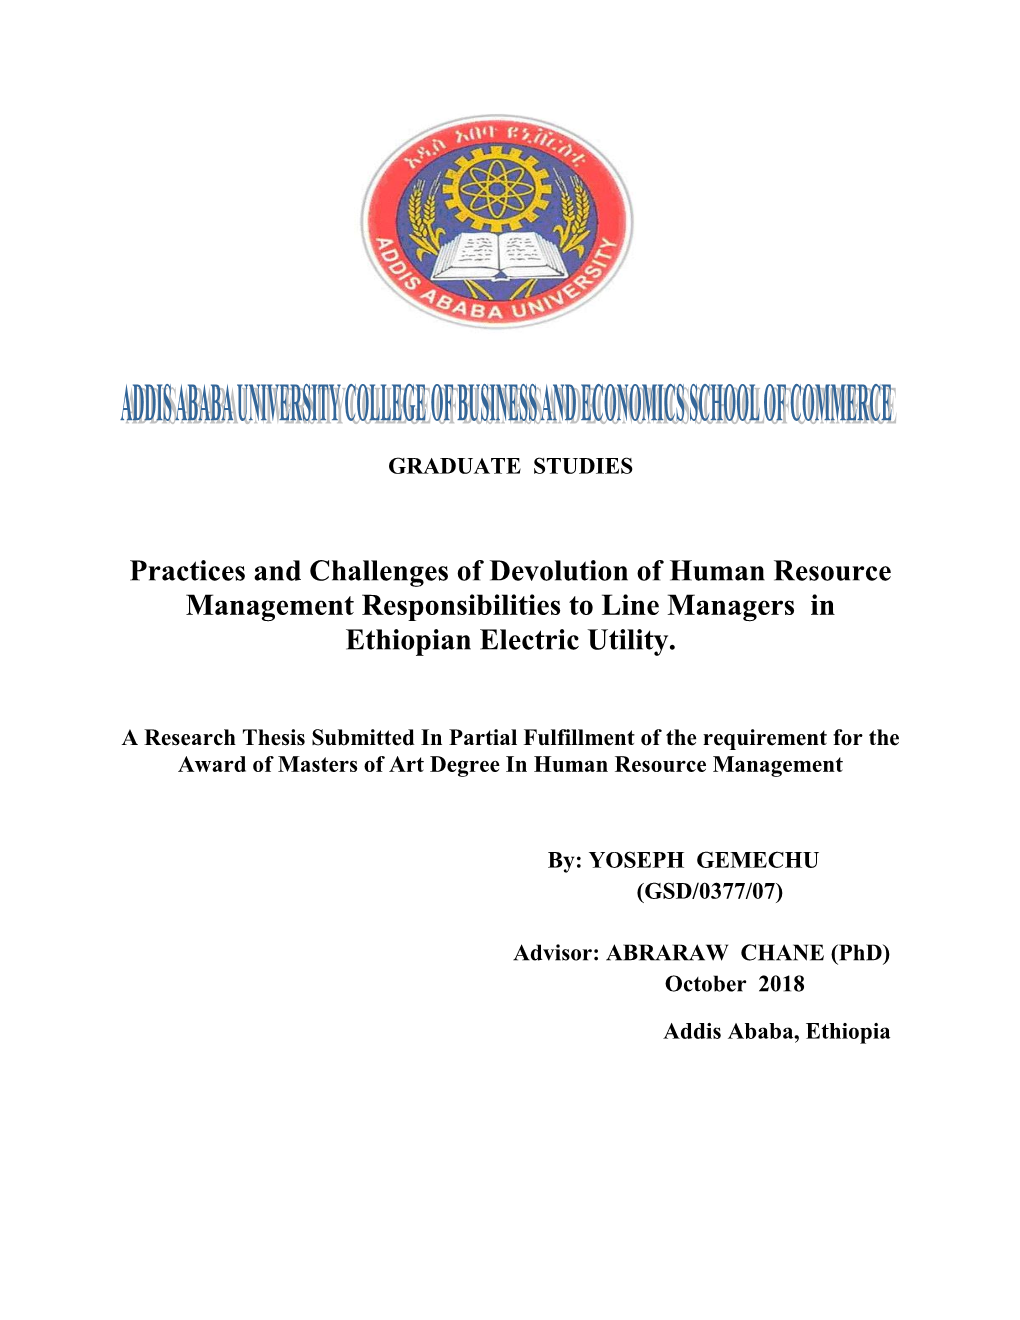 Practices and Challenges of Devolution of Human Resource Management Responsibilities to Line Managers in Ethiopian Electric Utility